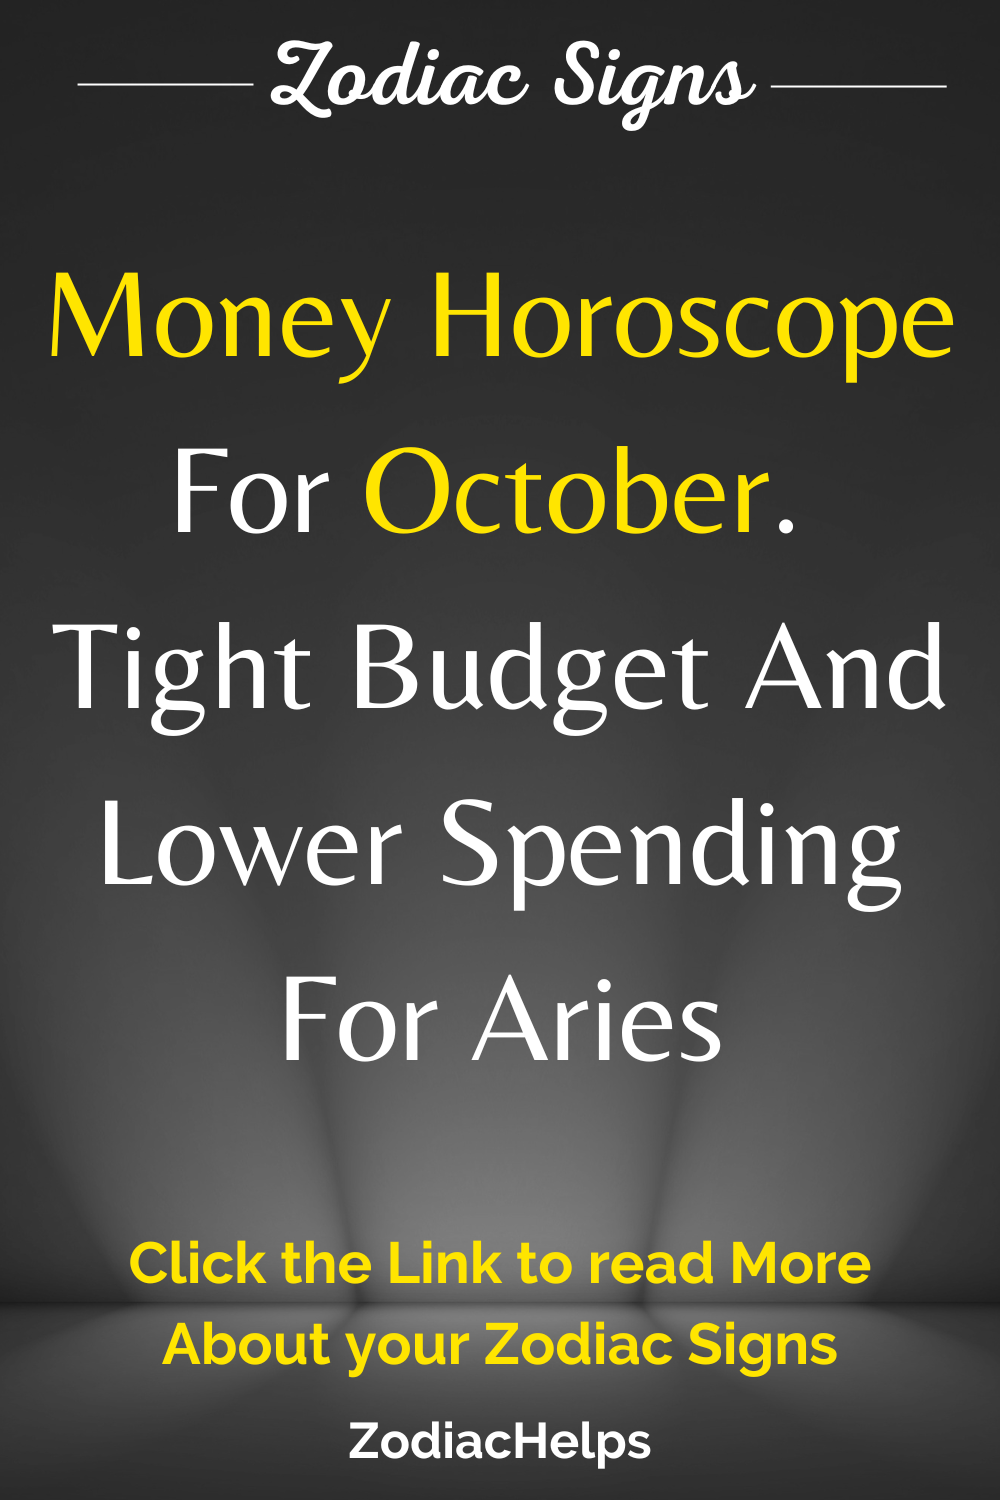 Money Horoscope For October. Tight Budget And Lower Spending For Aries